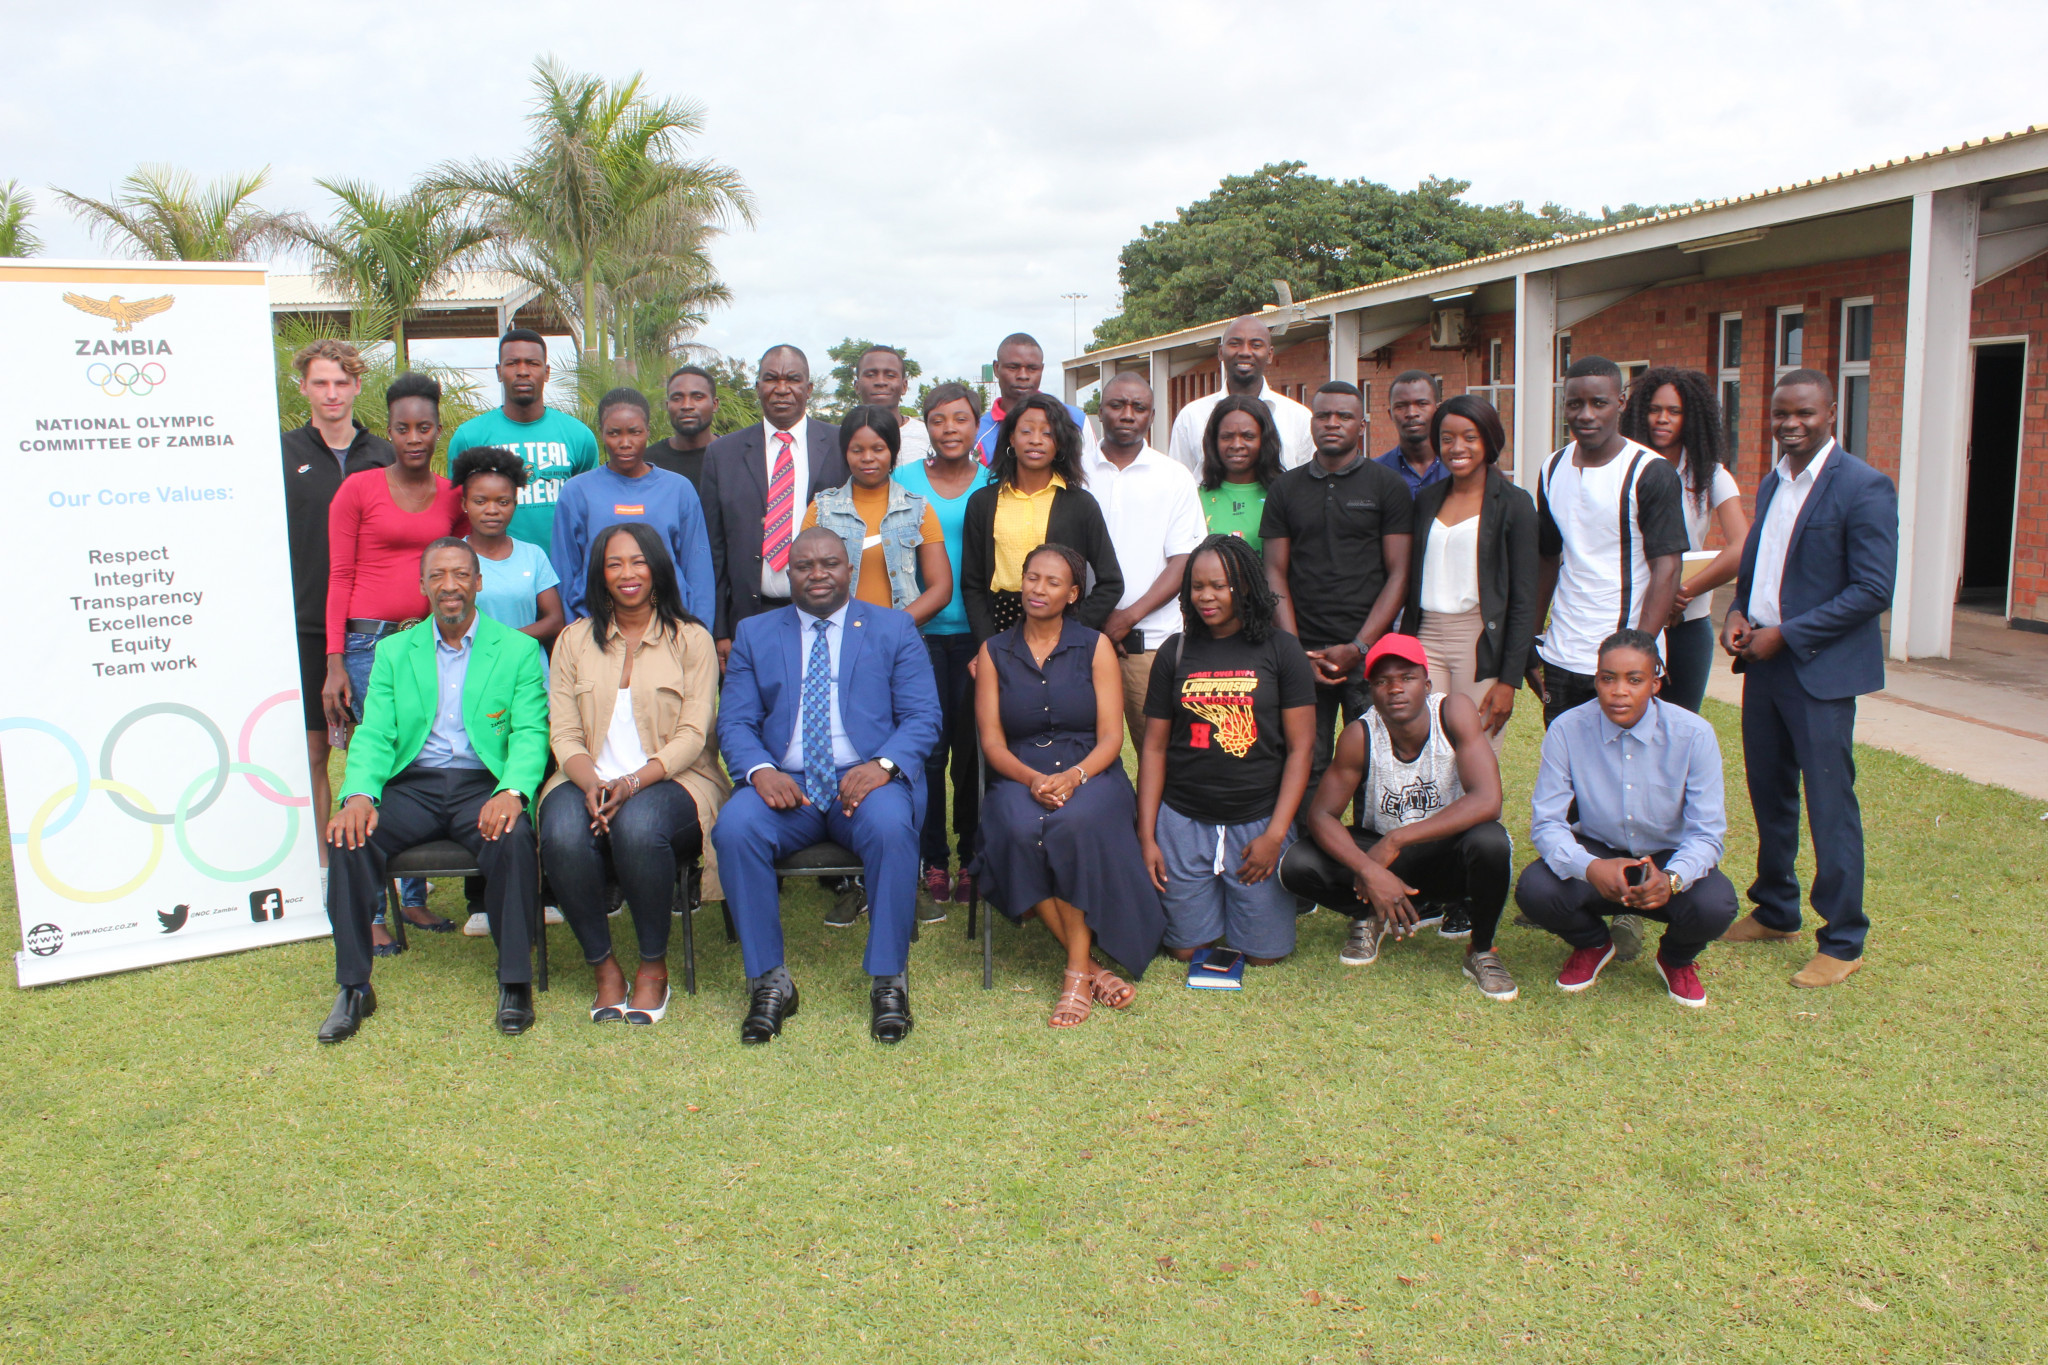 National Olympic Committee of Zambia launches Athletes' Commission